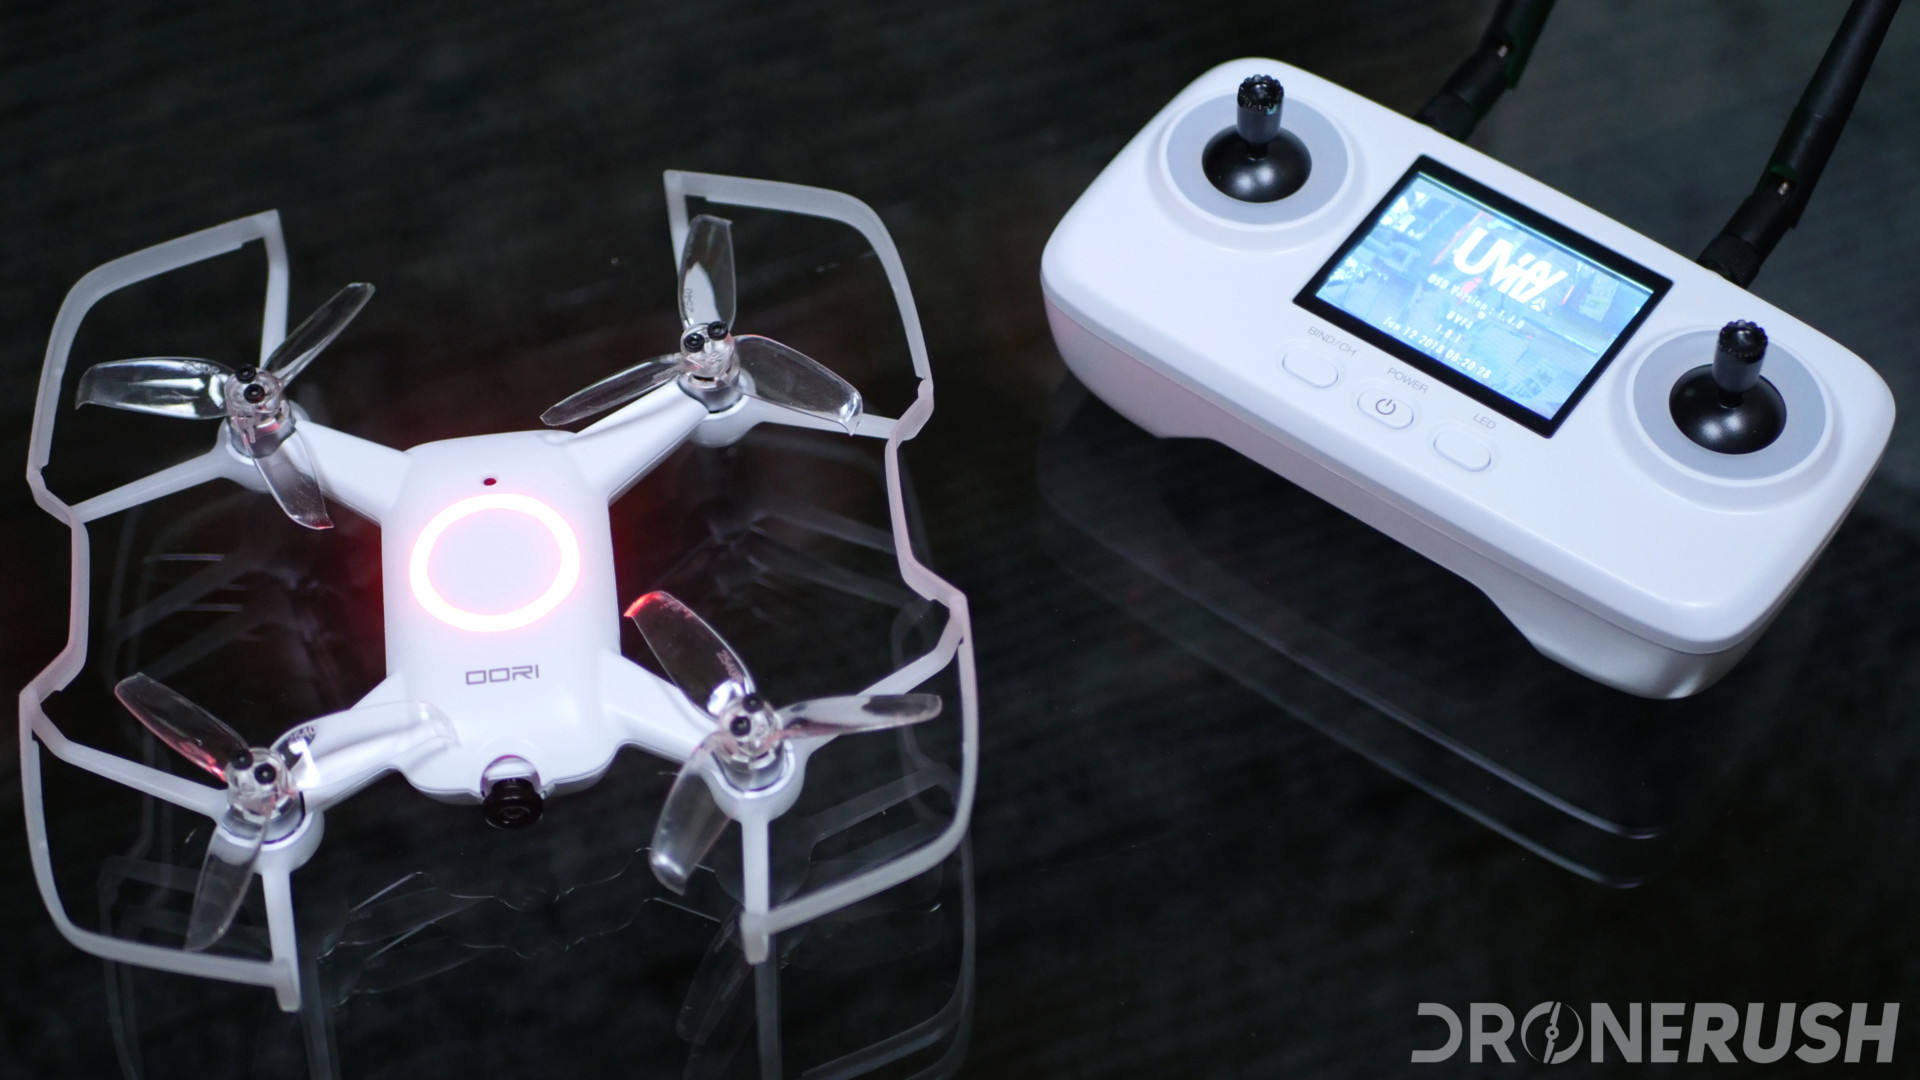 Uvify OOri unboxing drone and remote